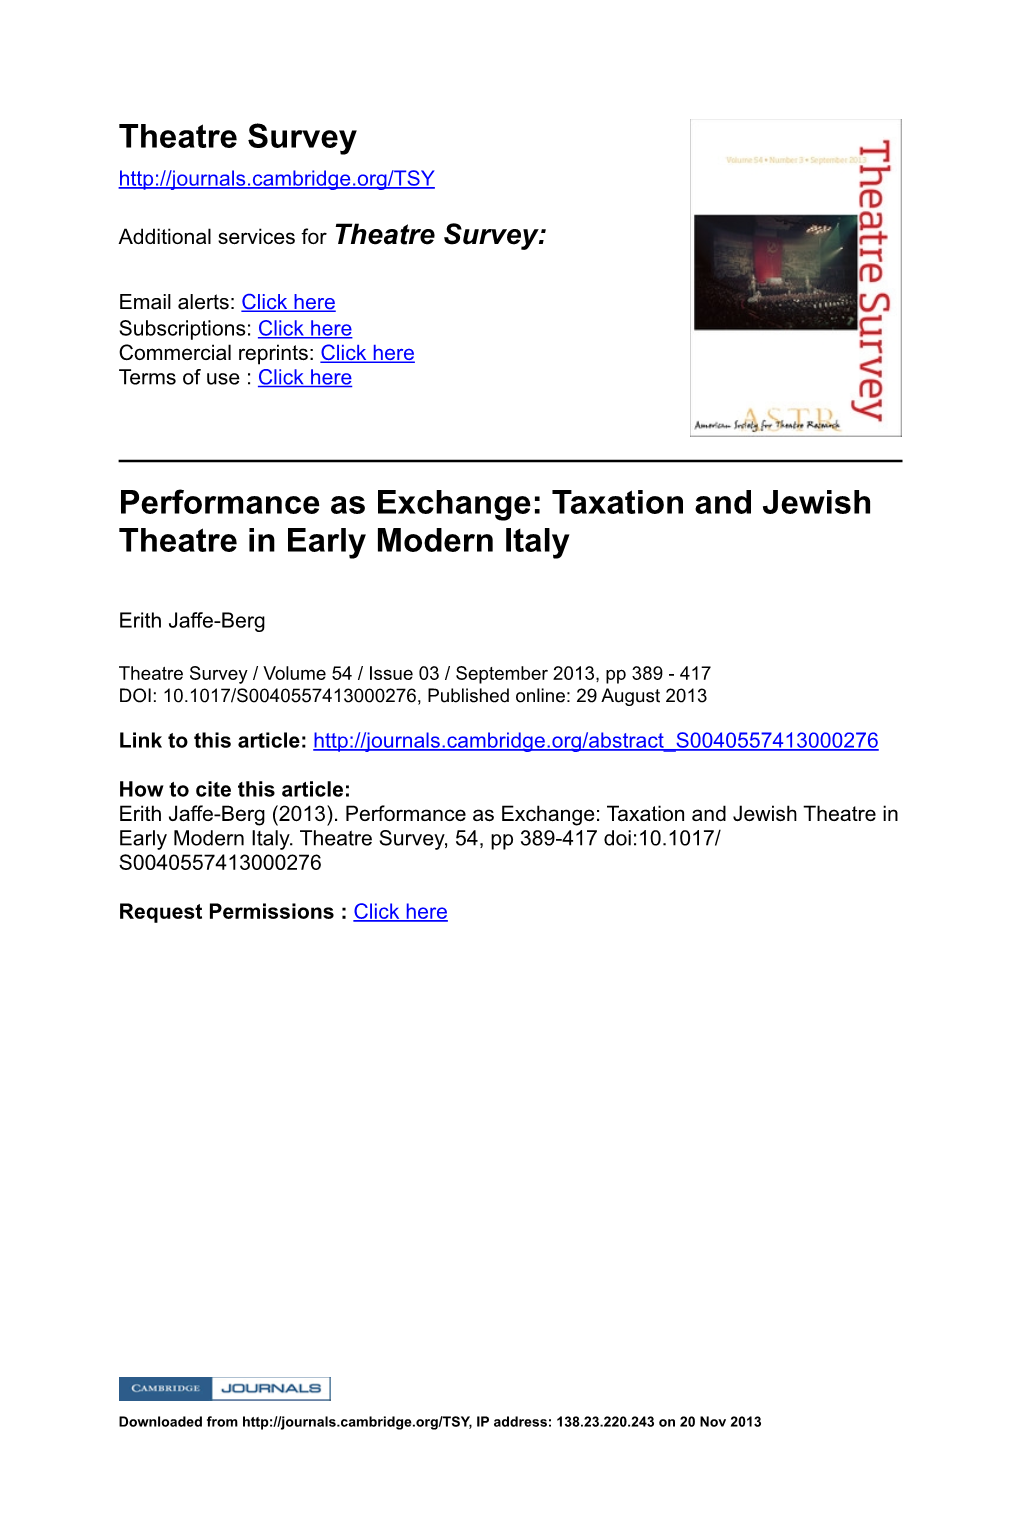 Taxation and Jewish Theatre in Early Modern Italy